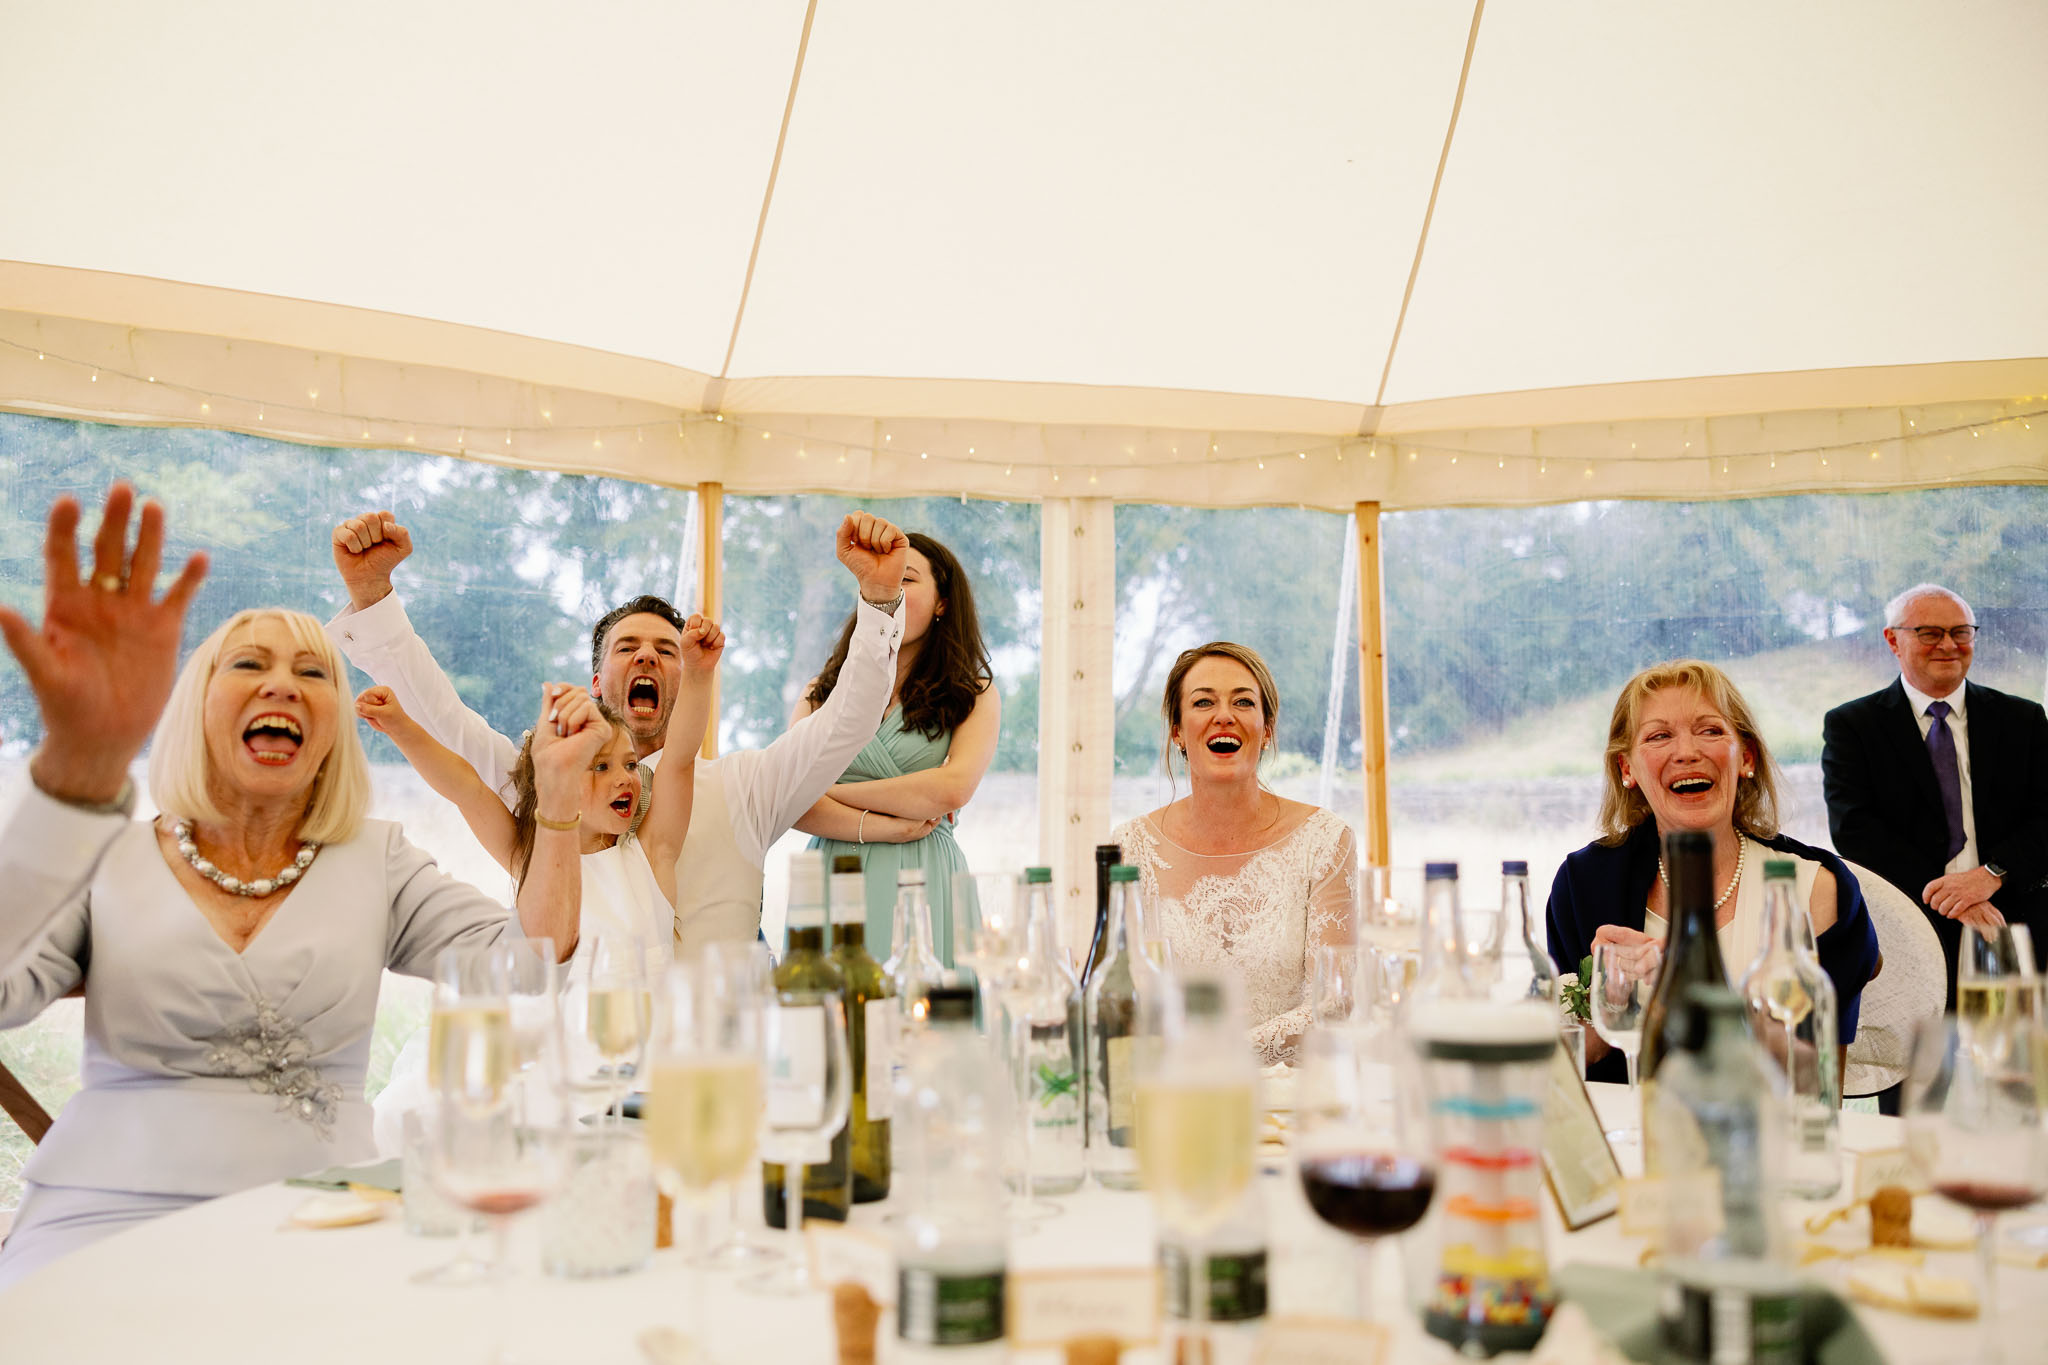 Outdoor Wedding Ceremony and Wills Marquee Reception at Jervaulx Abbey